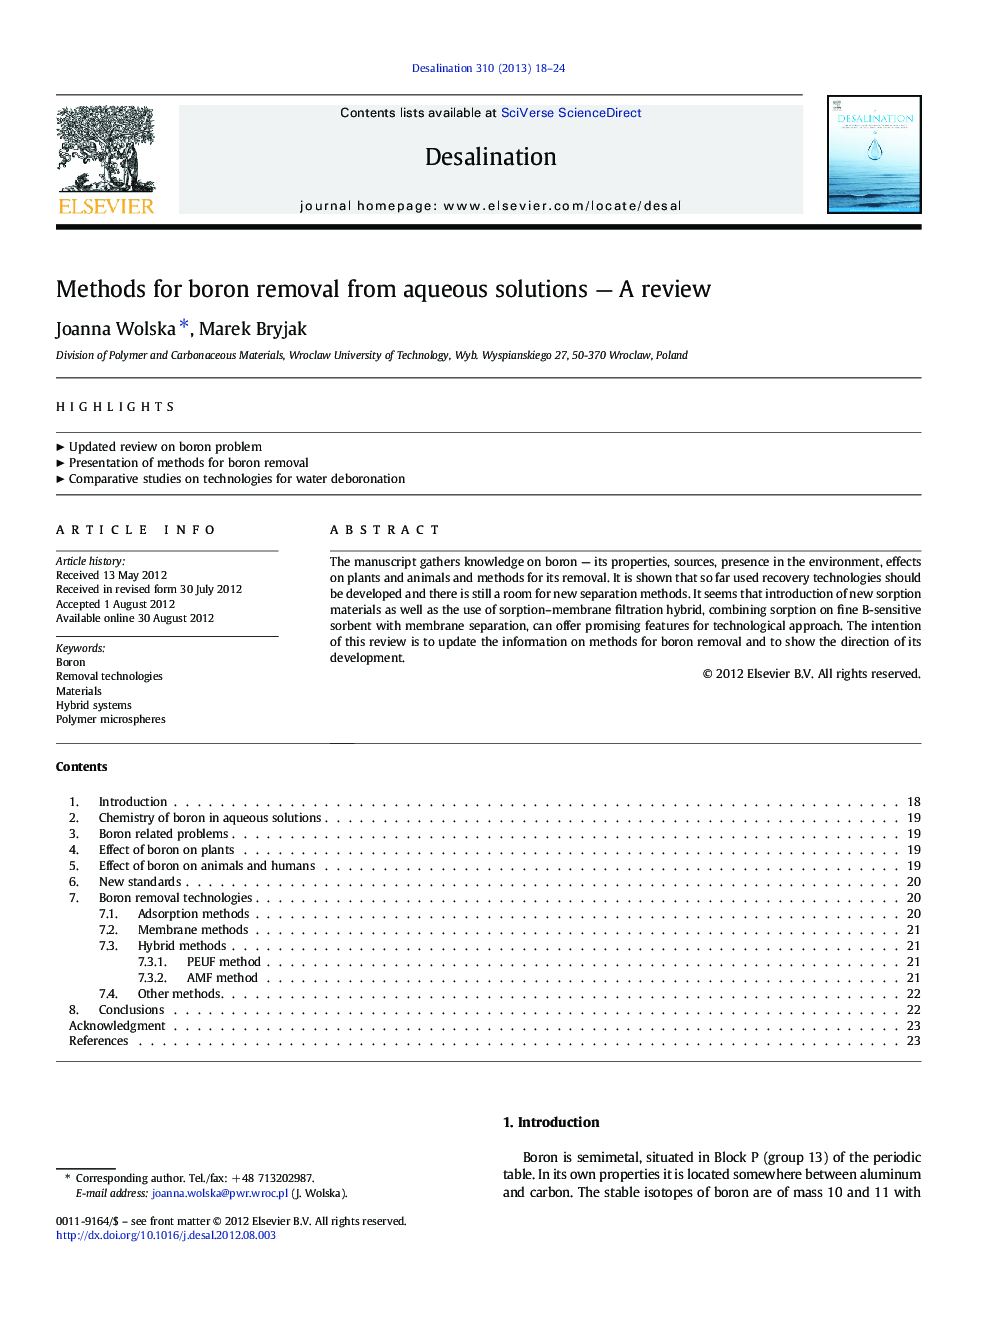 Methods for boron removal from aqueous solutions — A review